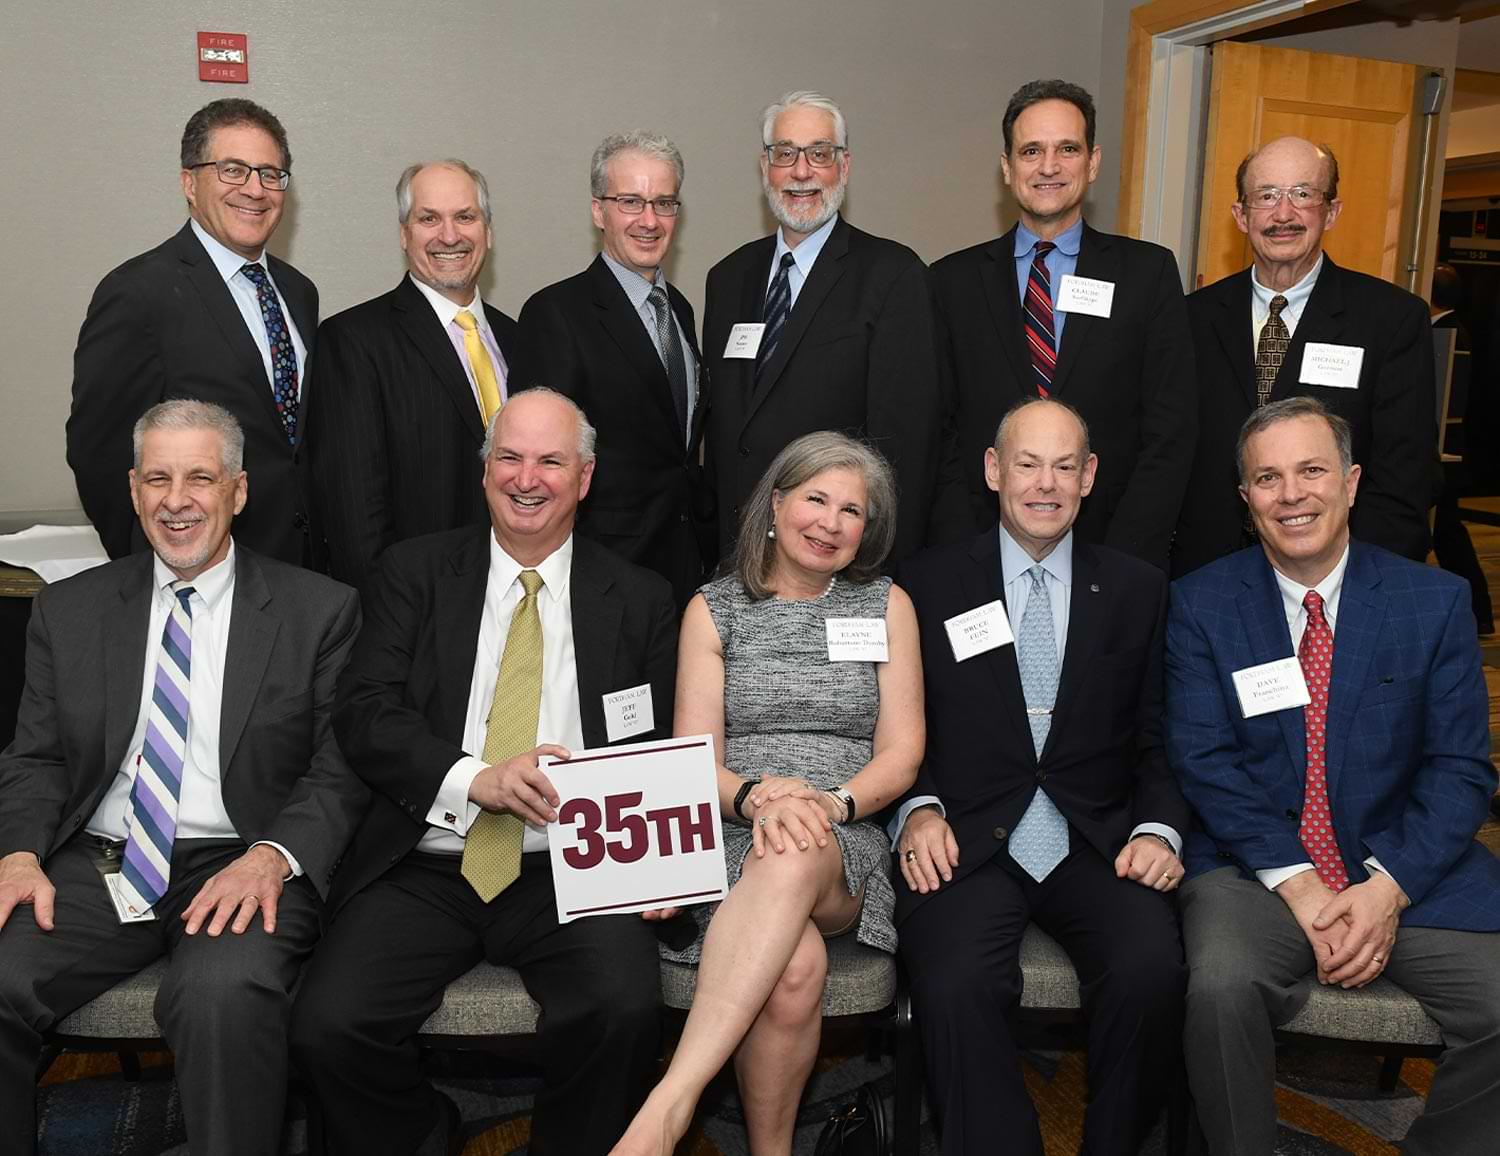 members of an alumni class celebrating their 35th reunion take a group photo